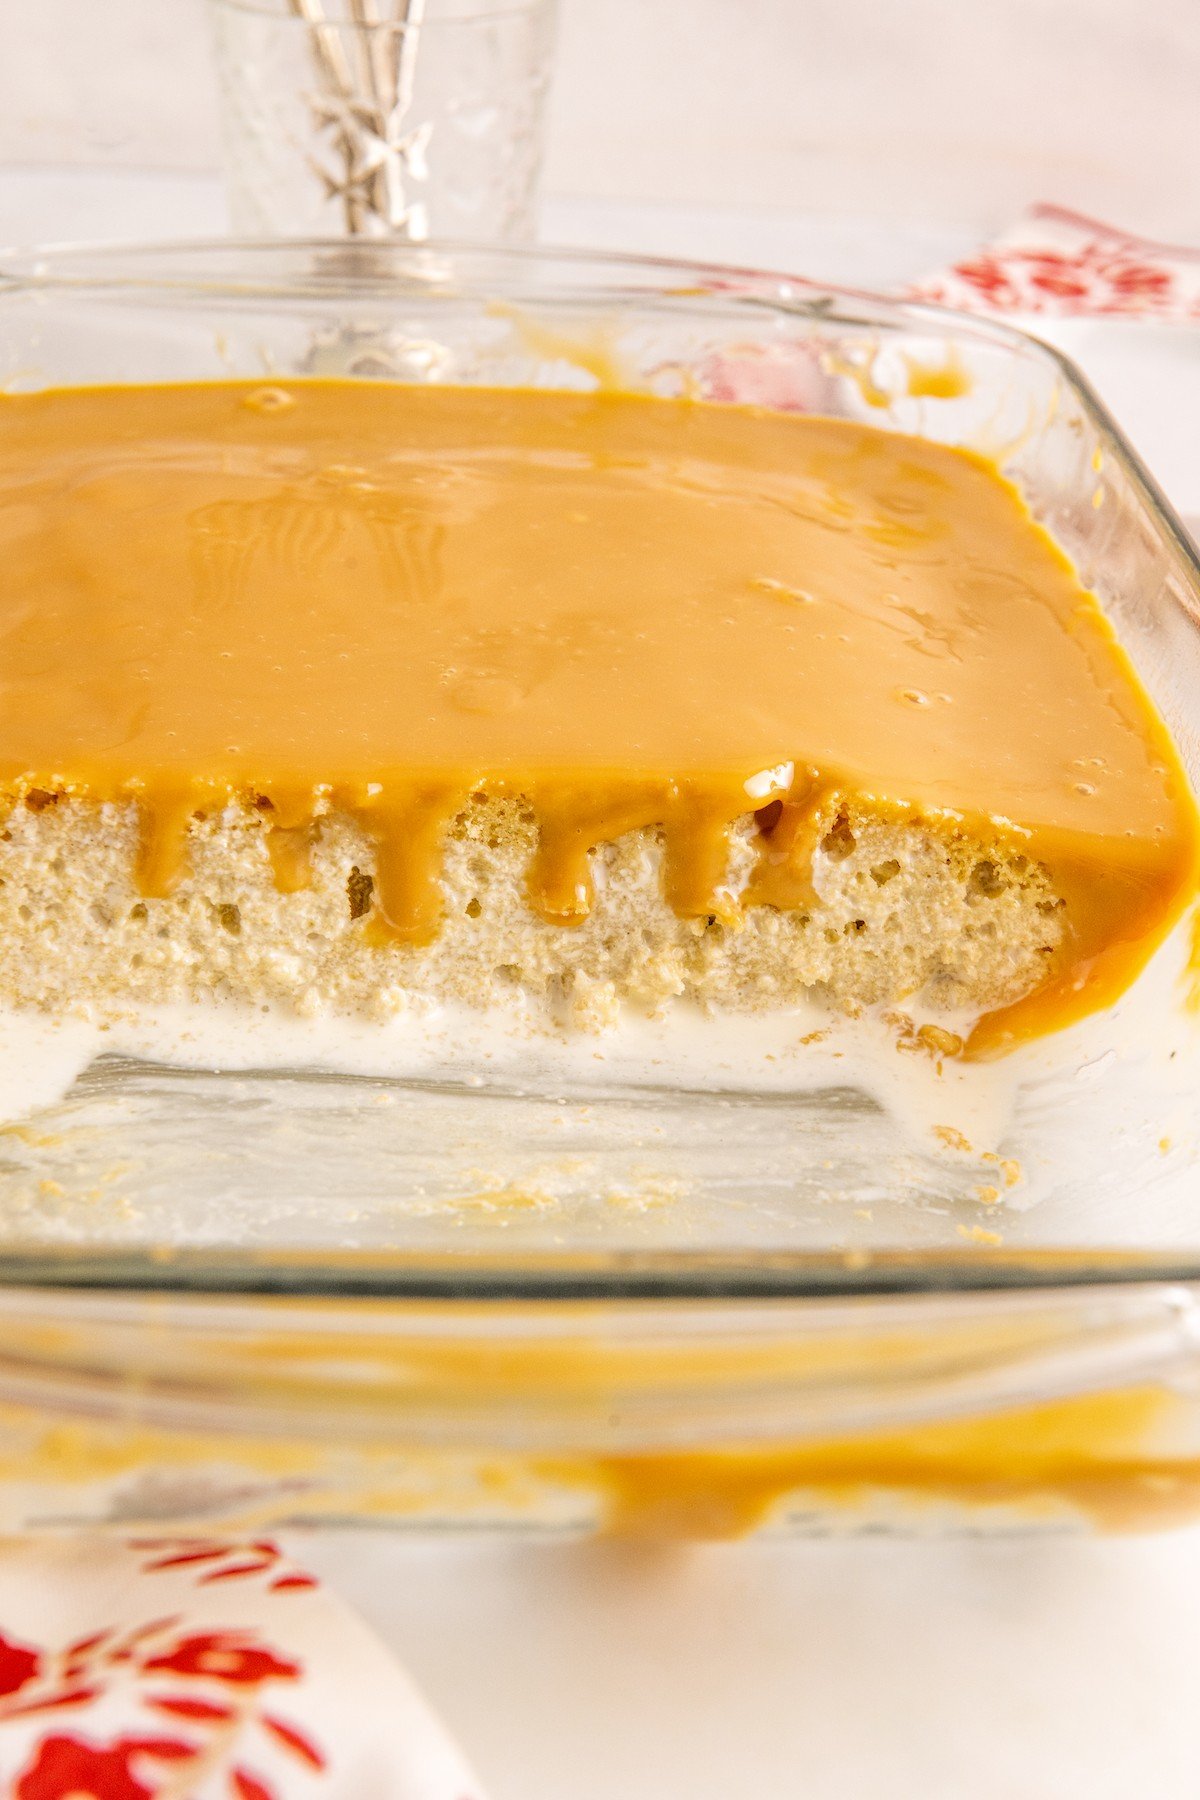 A cake made in a glass pan, with some slices cut out to show the sweetened condensed milk soaking the cake crumb and the topping drizzling down the sides.